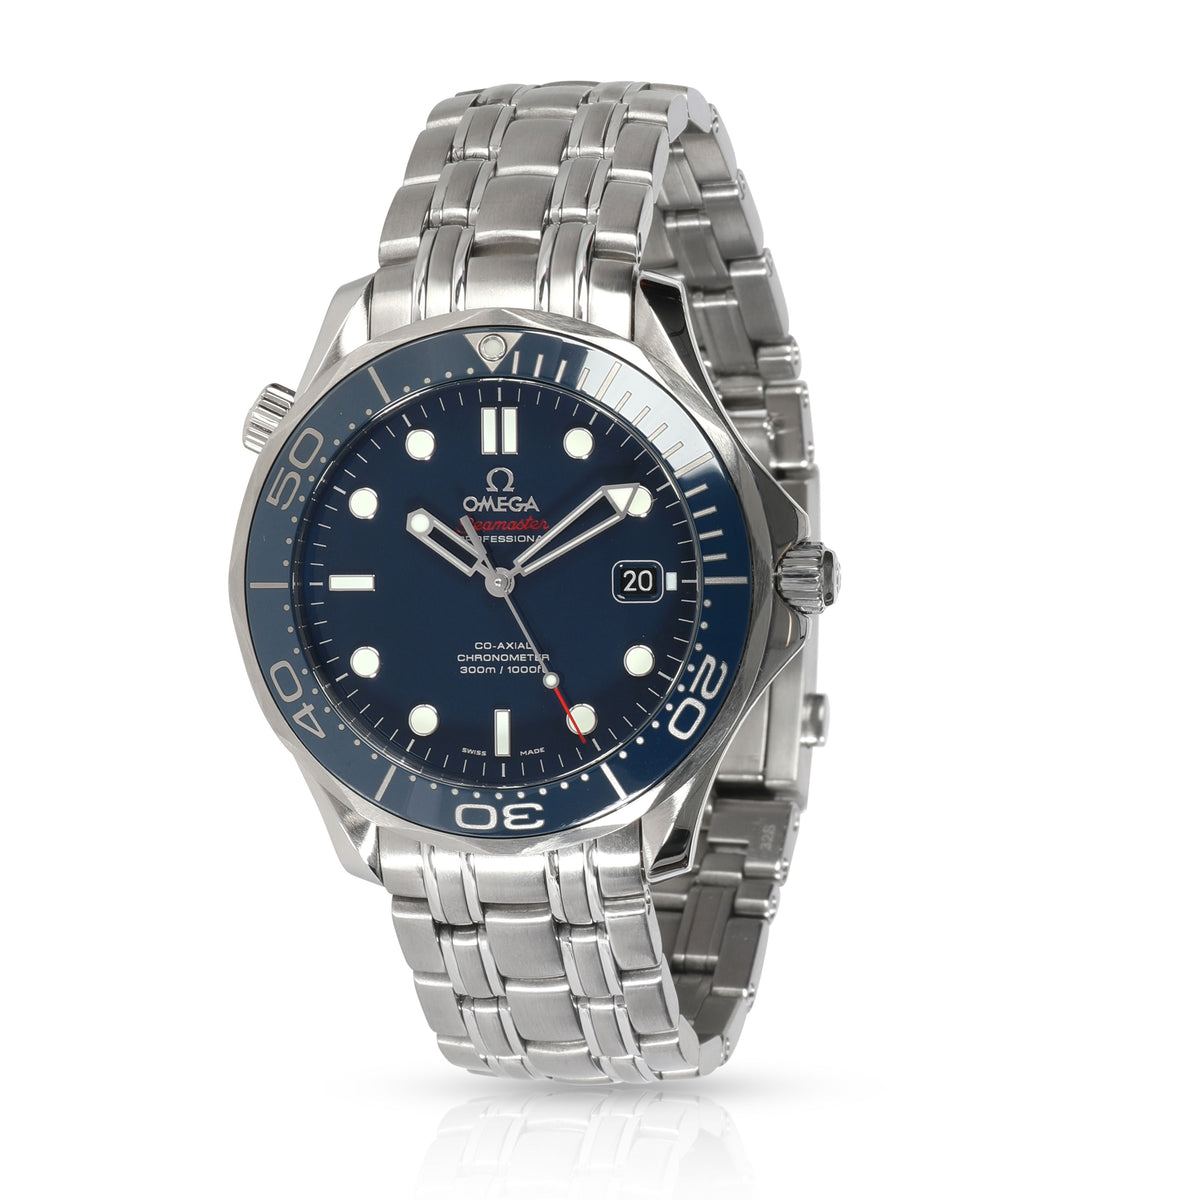 Omega Seamaster Diver 300M 212.30.41.20.03.001 Men's Watch in  Stainless Steel